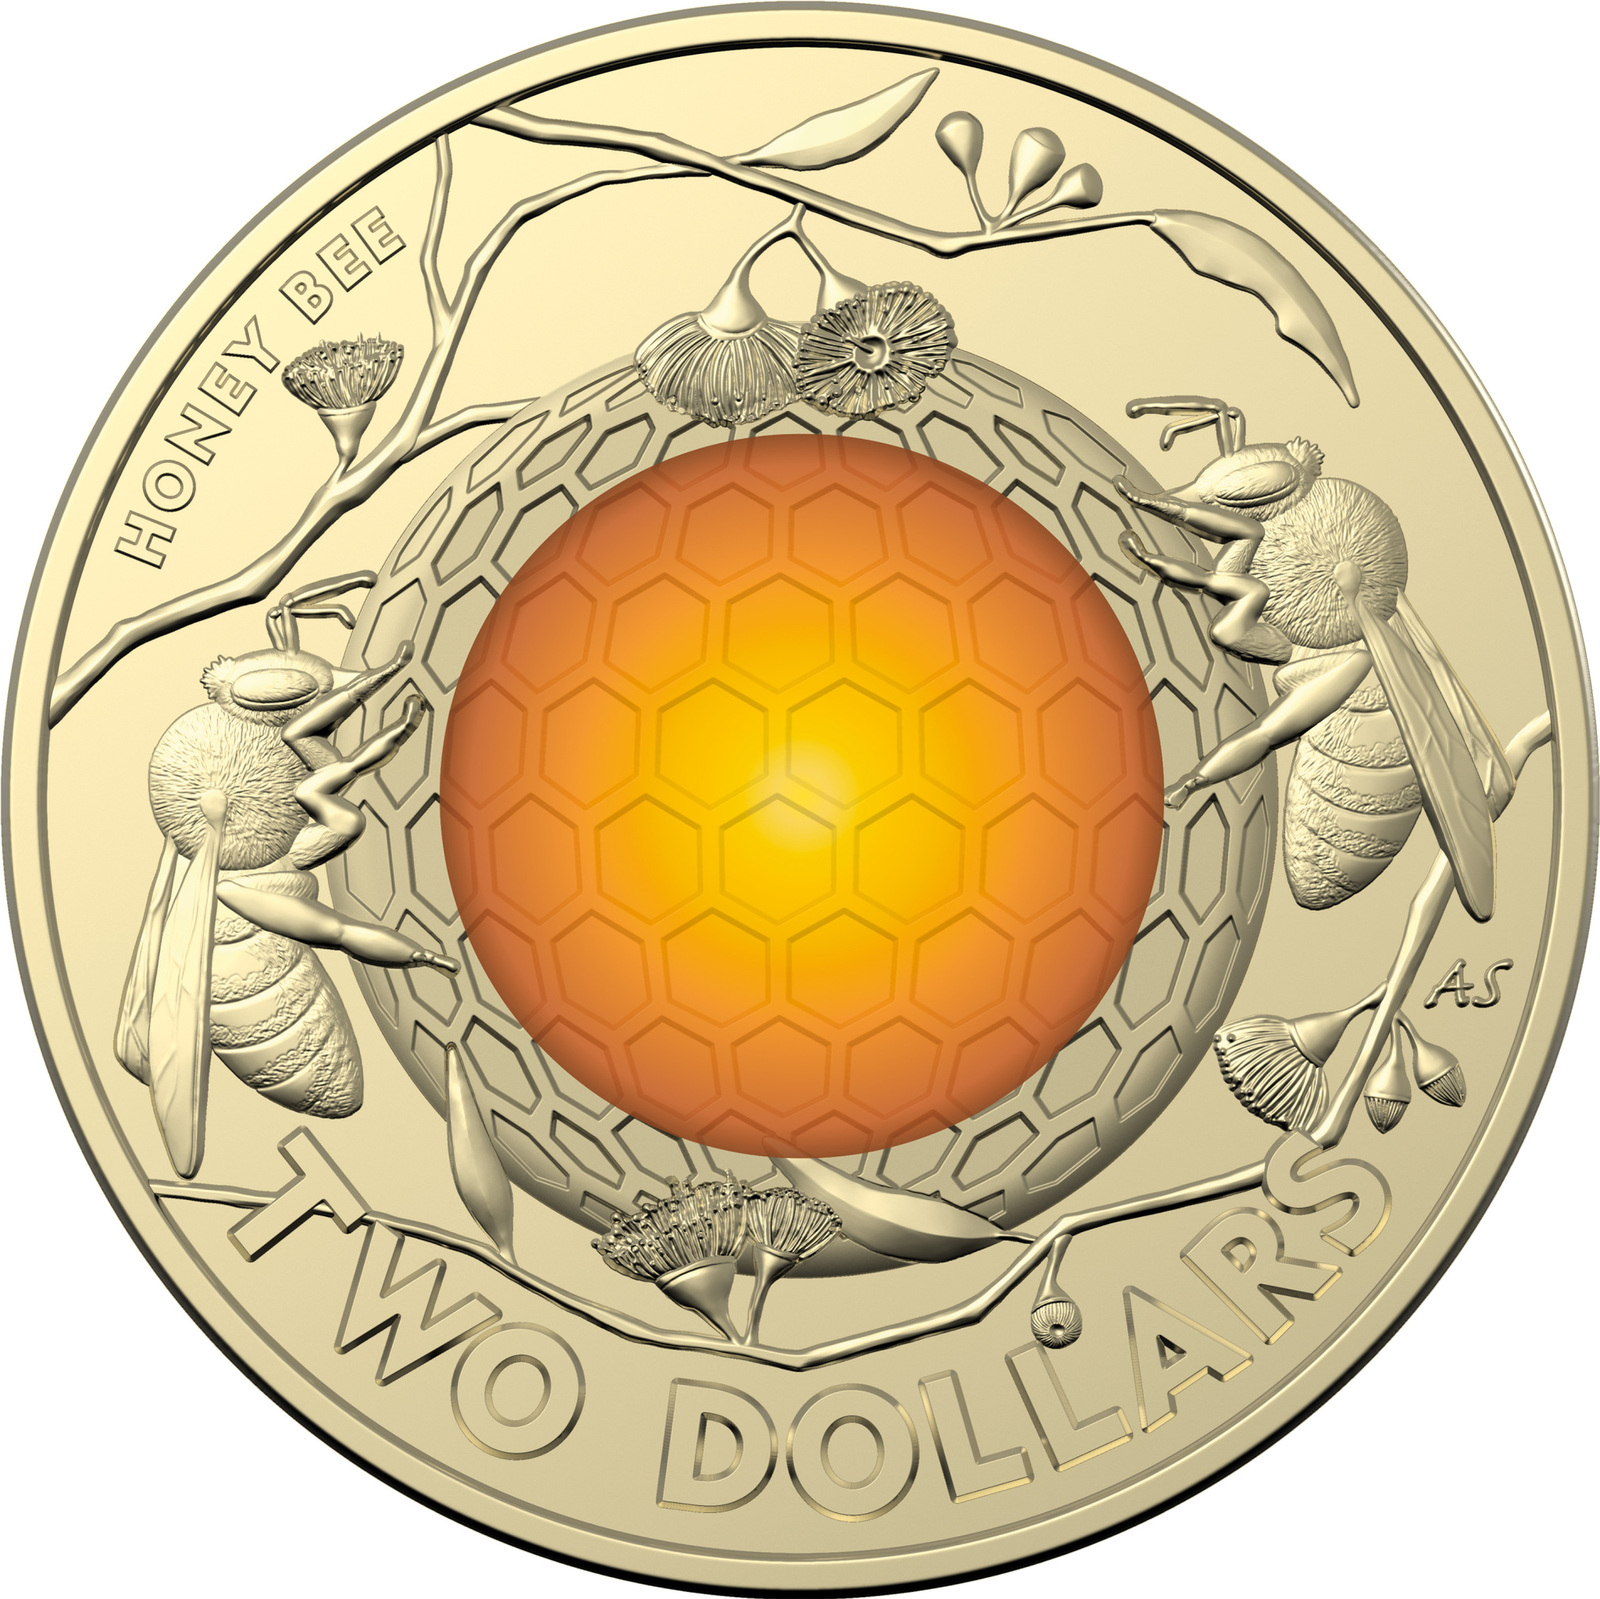 2022 $2 Honey Bee Coloured Coin Pack